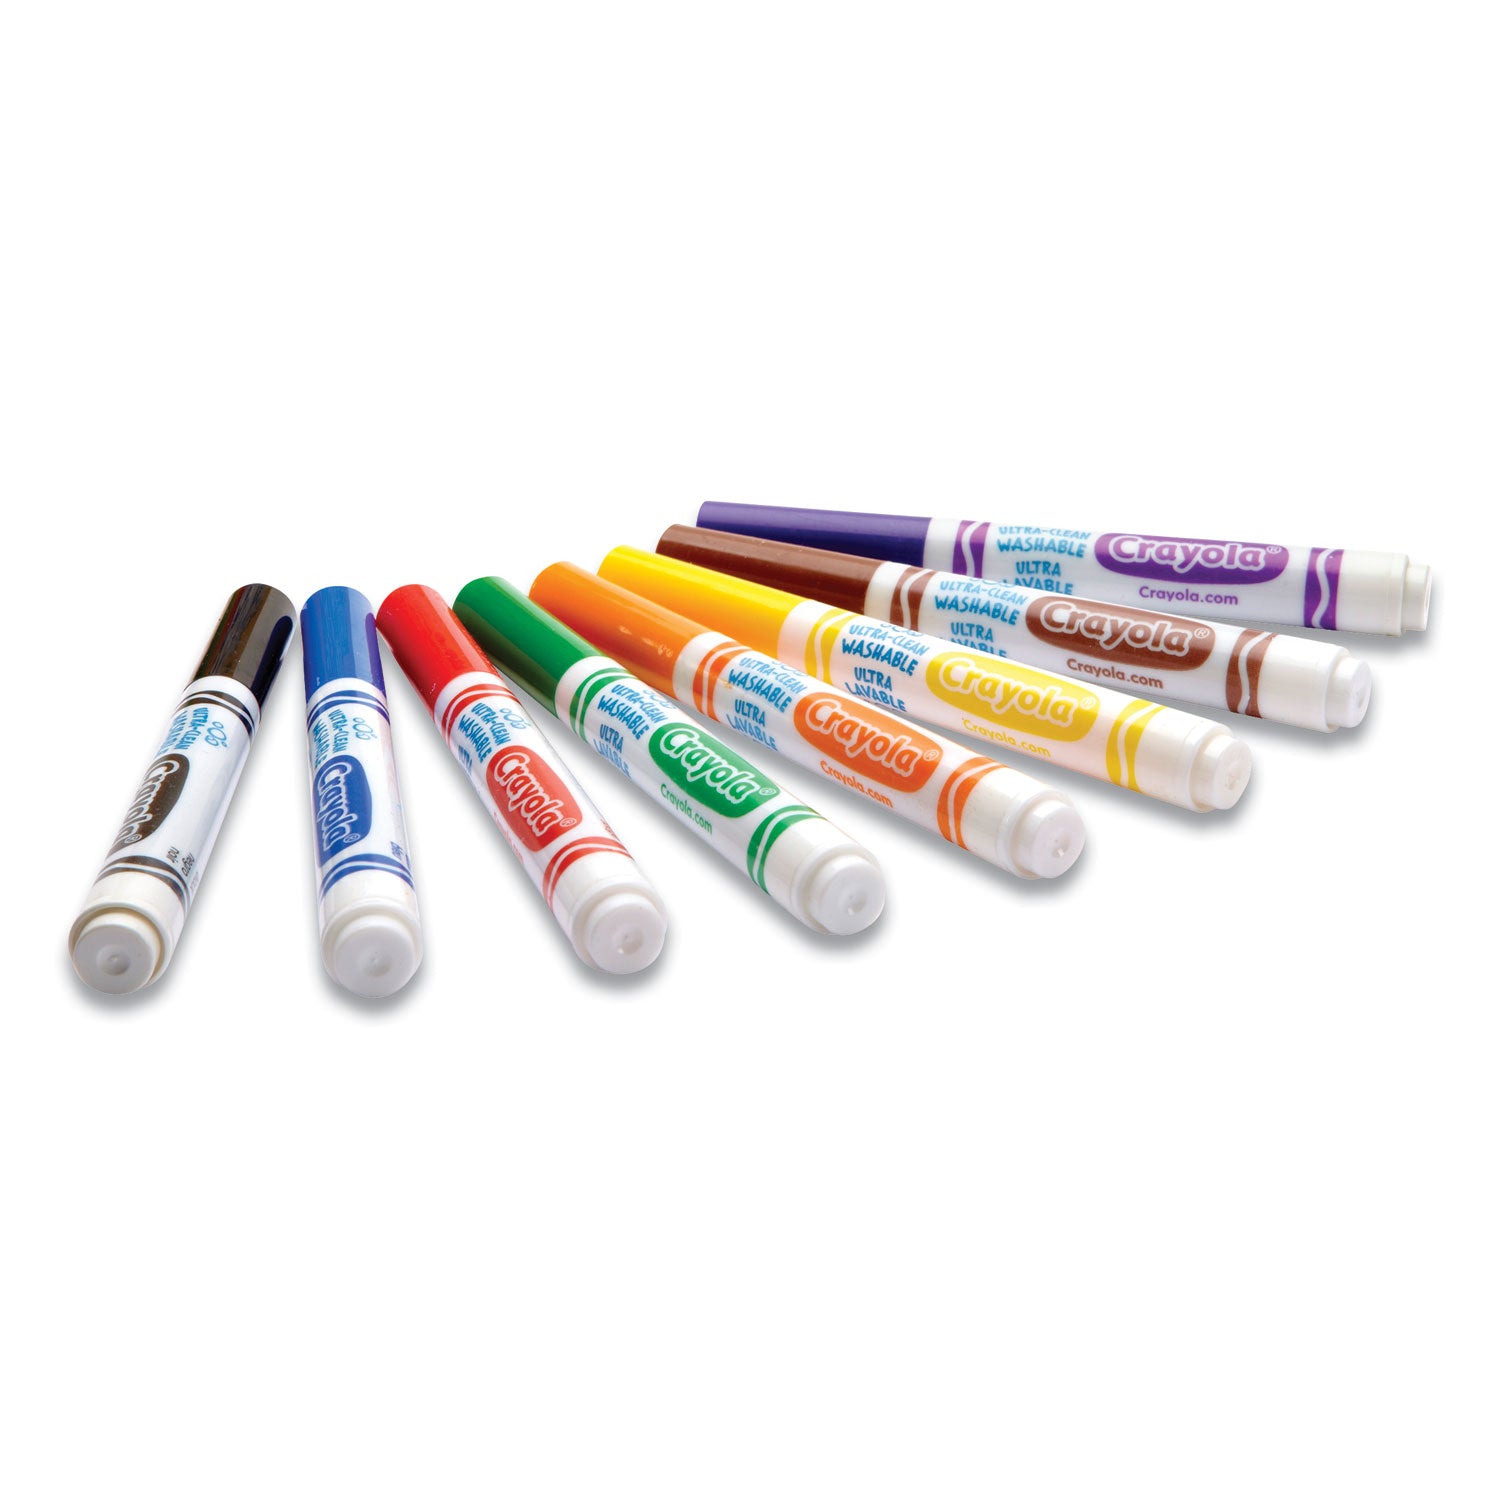 ultra-clean-washable-markers-fine-broad-wedge-chisel-tips-assorted-colors-8-box_cyo587208 - 3